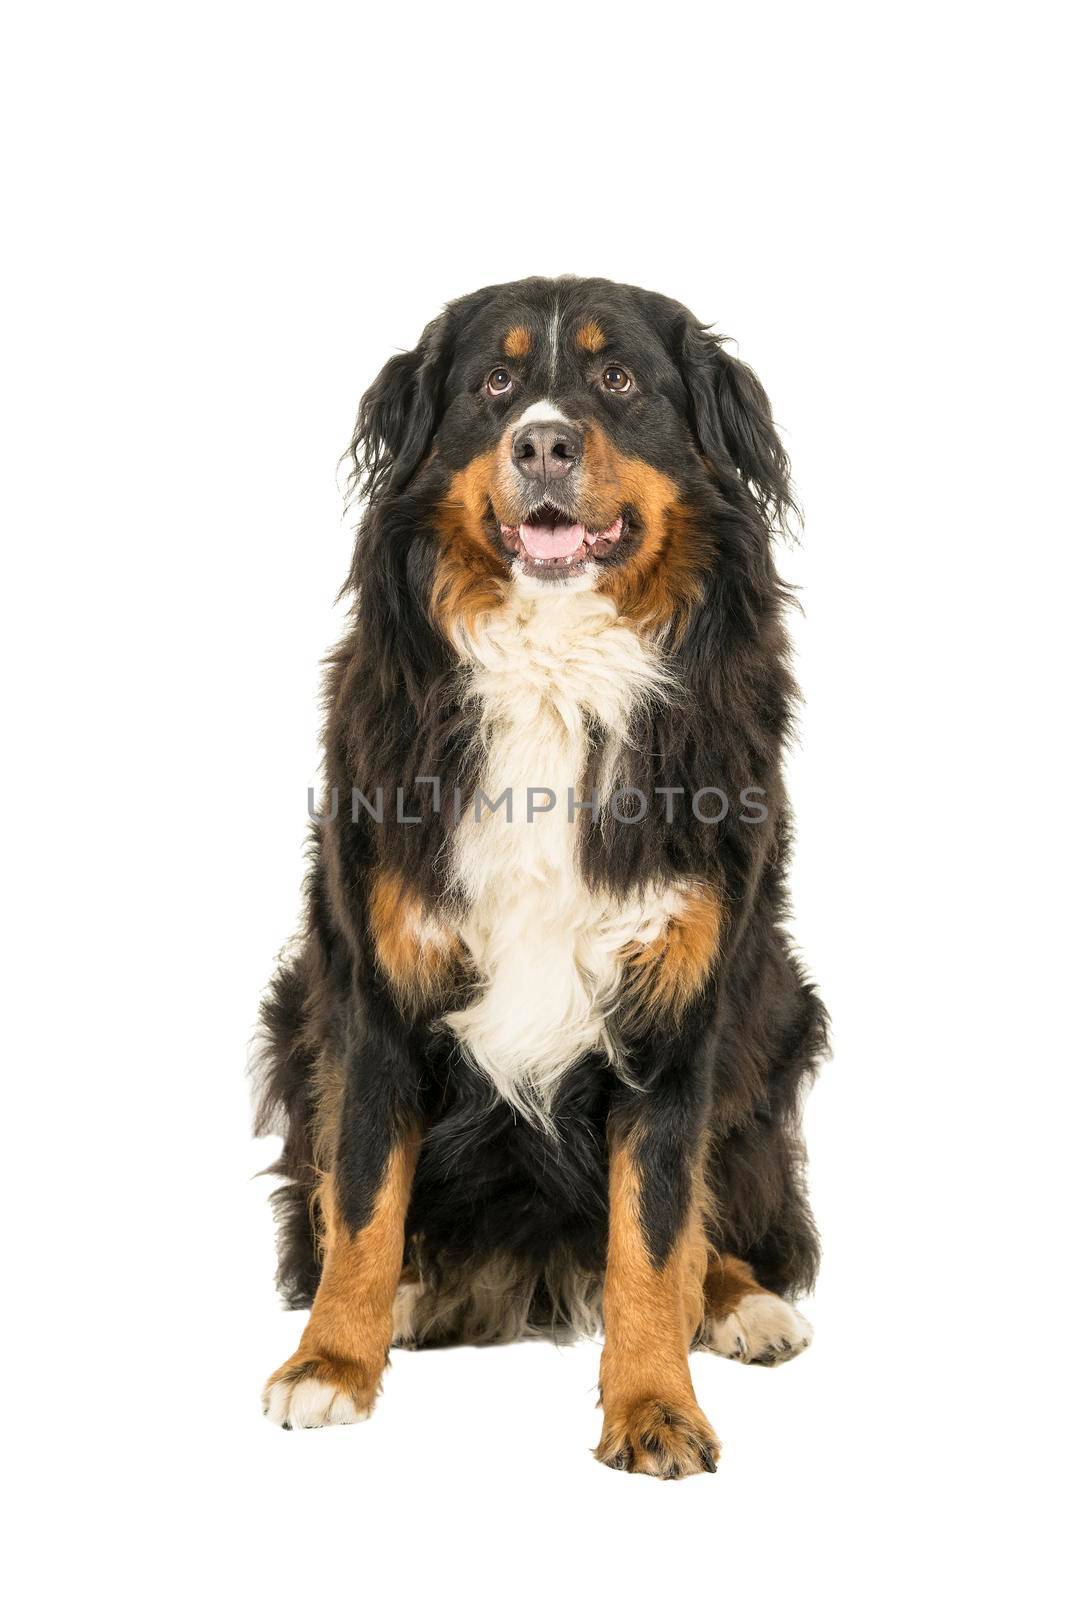 Berner Sennen Mountain dog sitting looking up isolated on a white background by LeoniekvanderVliet